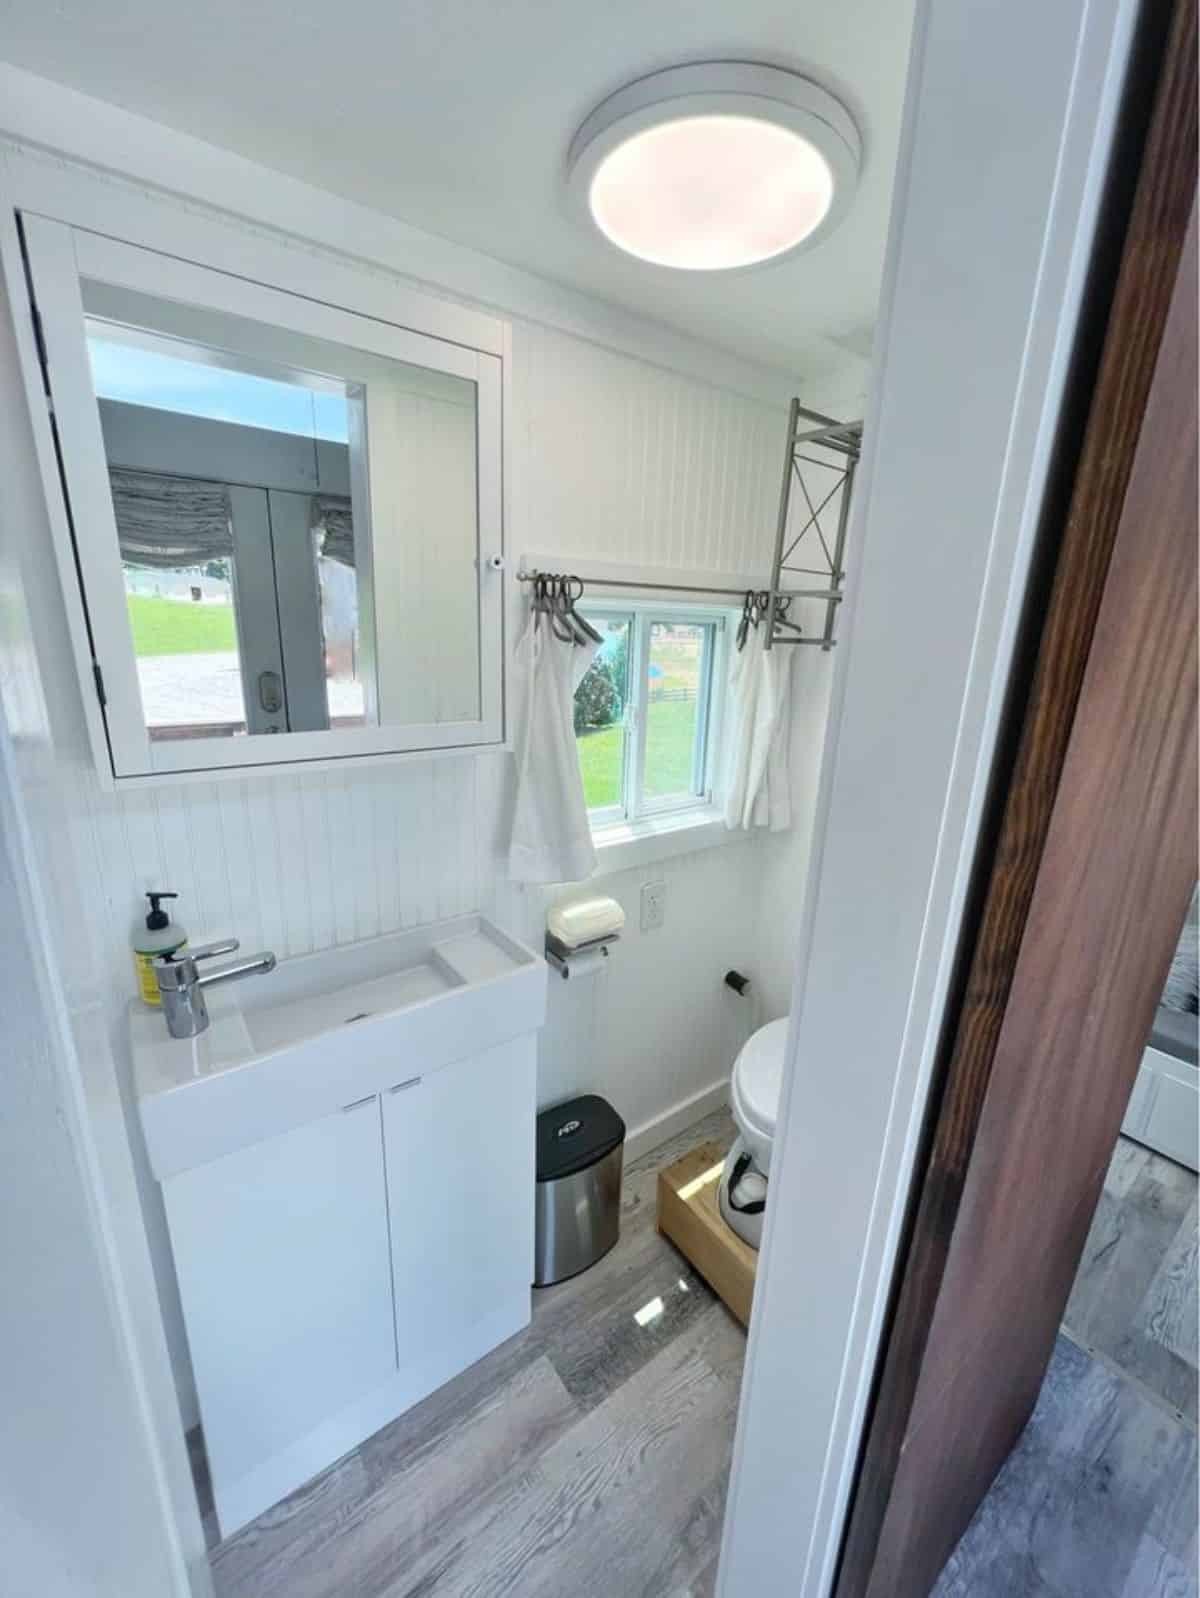 Sink with vanity and mirror and standard toilet in bathroom